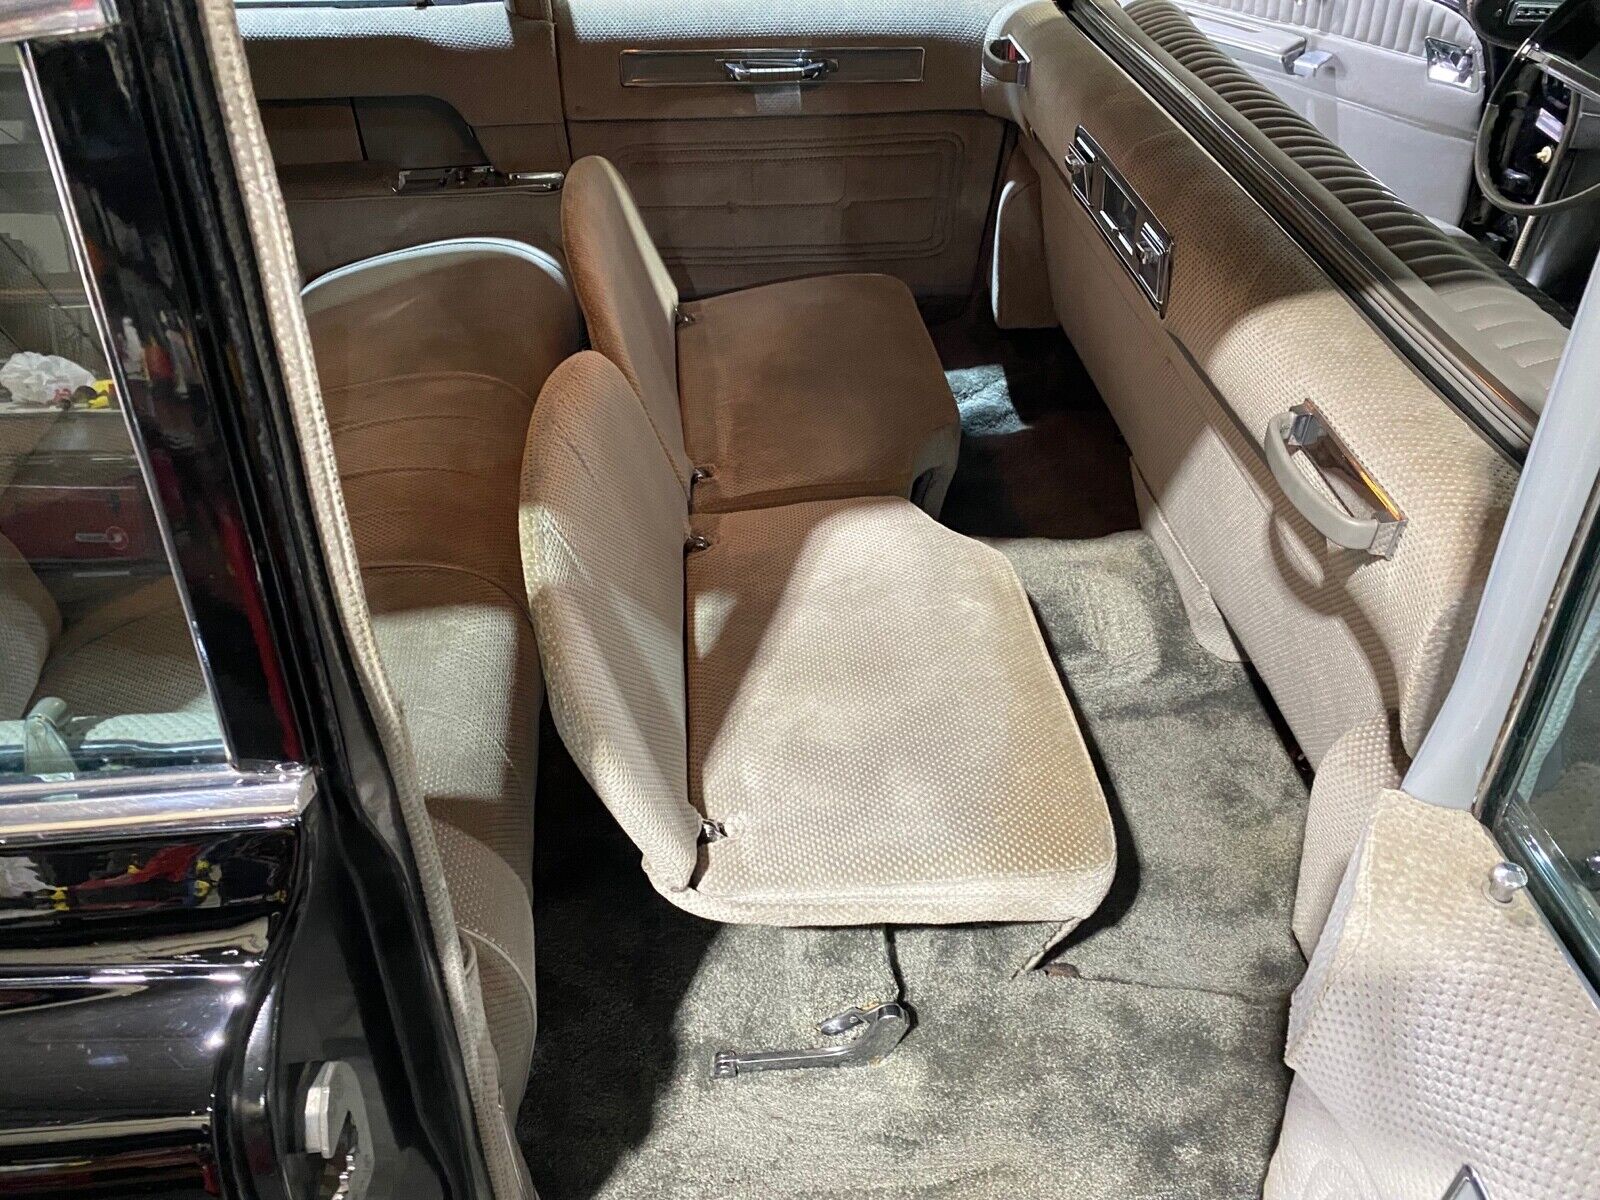 Our Fascination with Presidential Limos, Like This 1963 Caddy - eBay Motors Blog